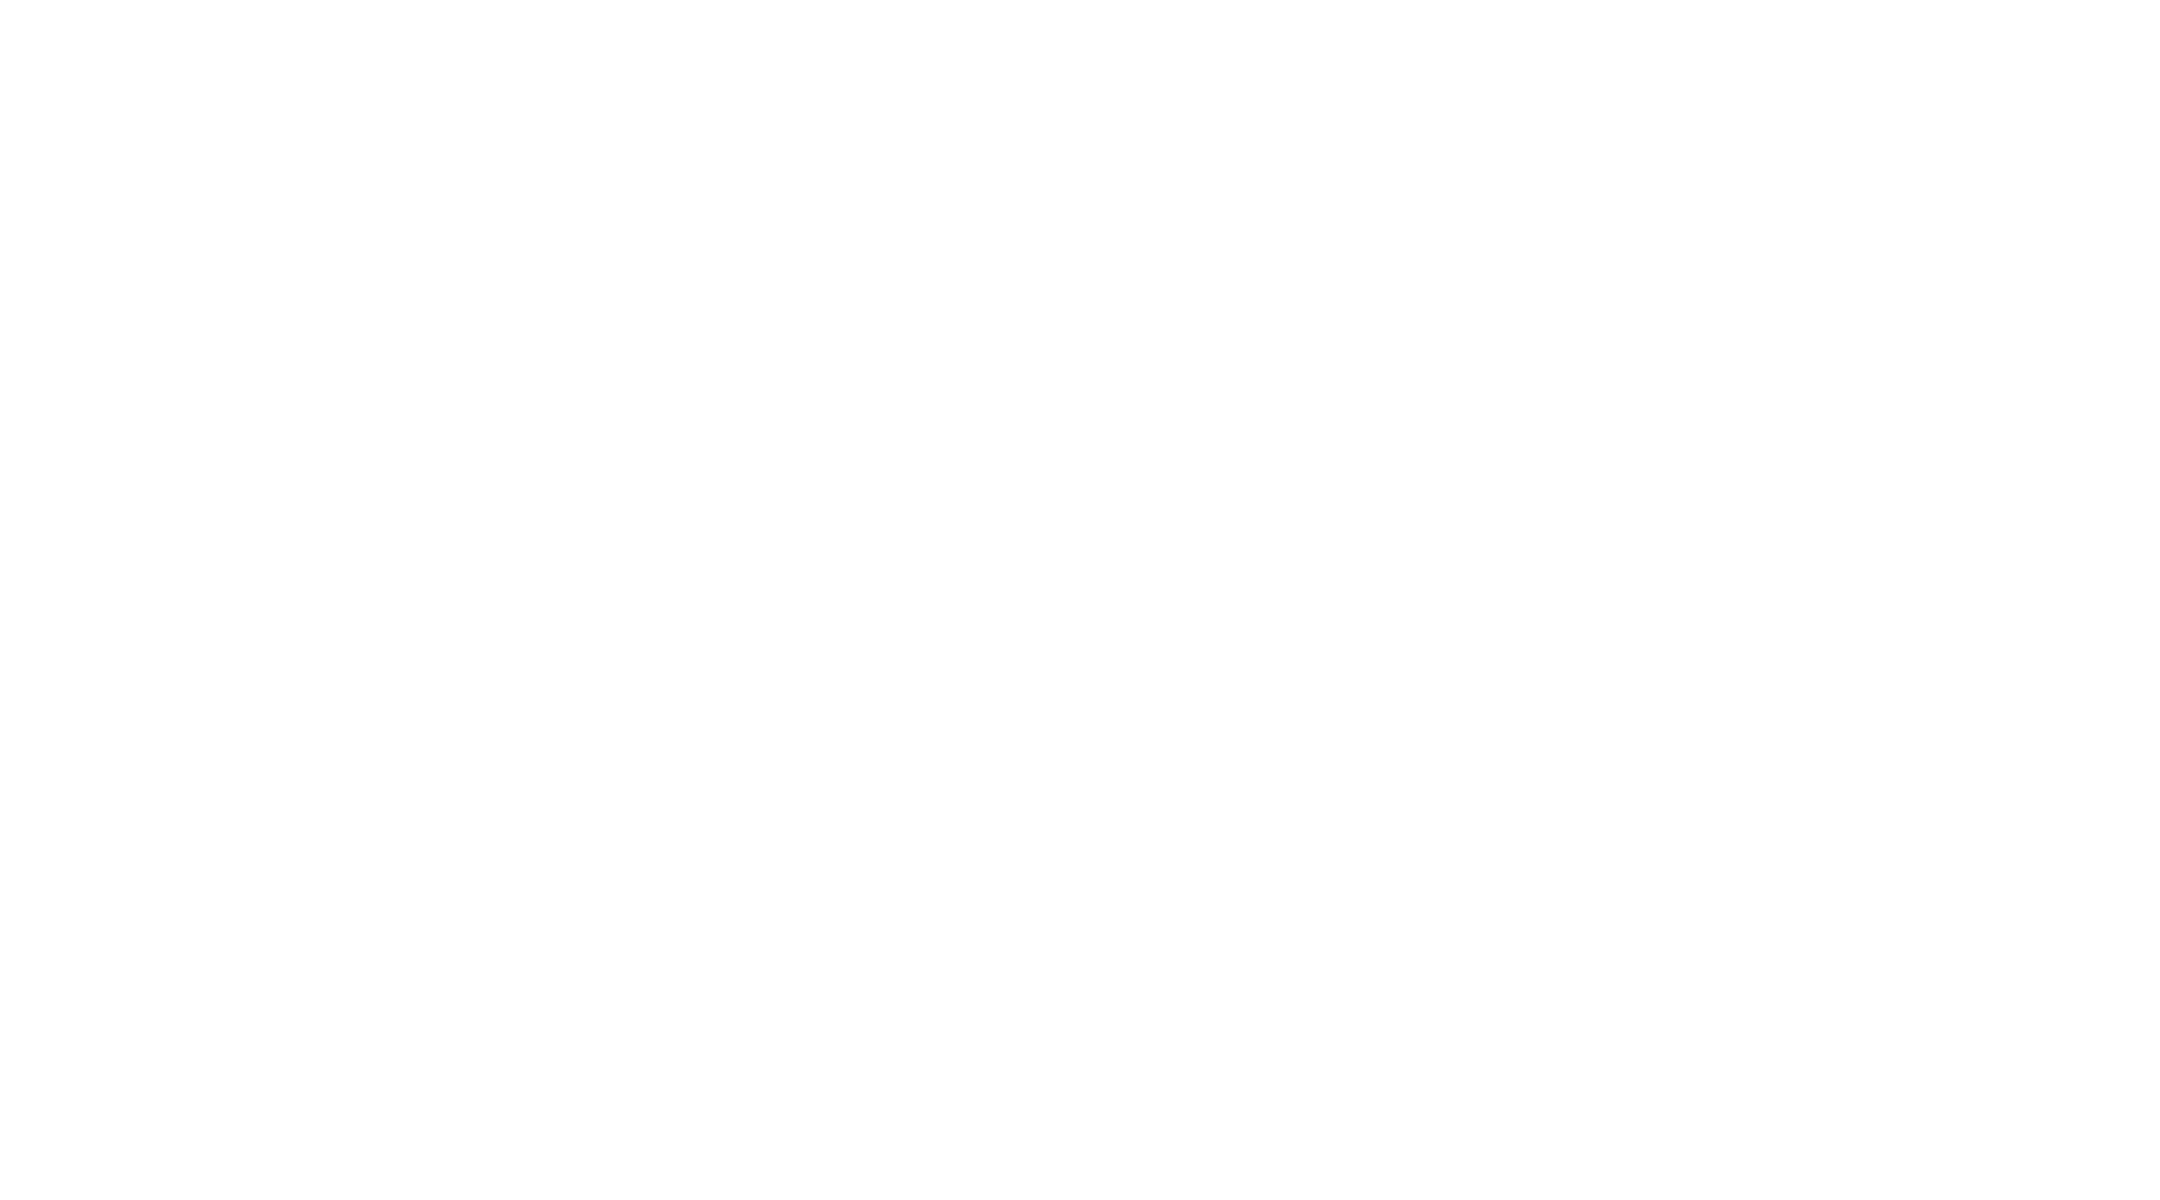 WITH - We-with.com